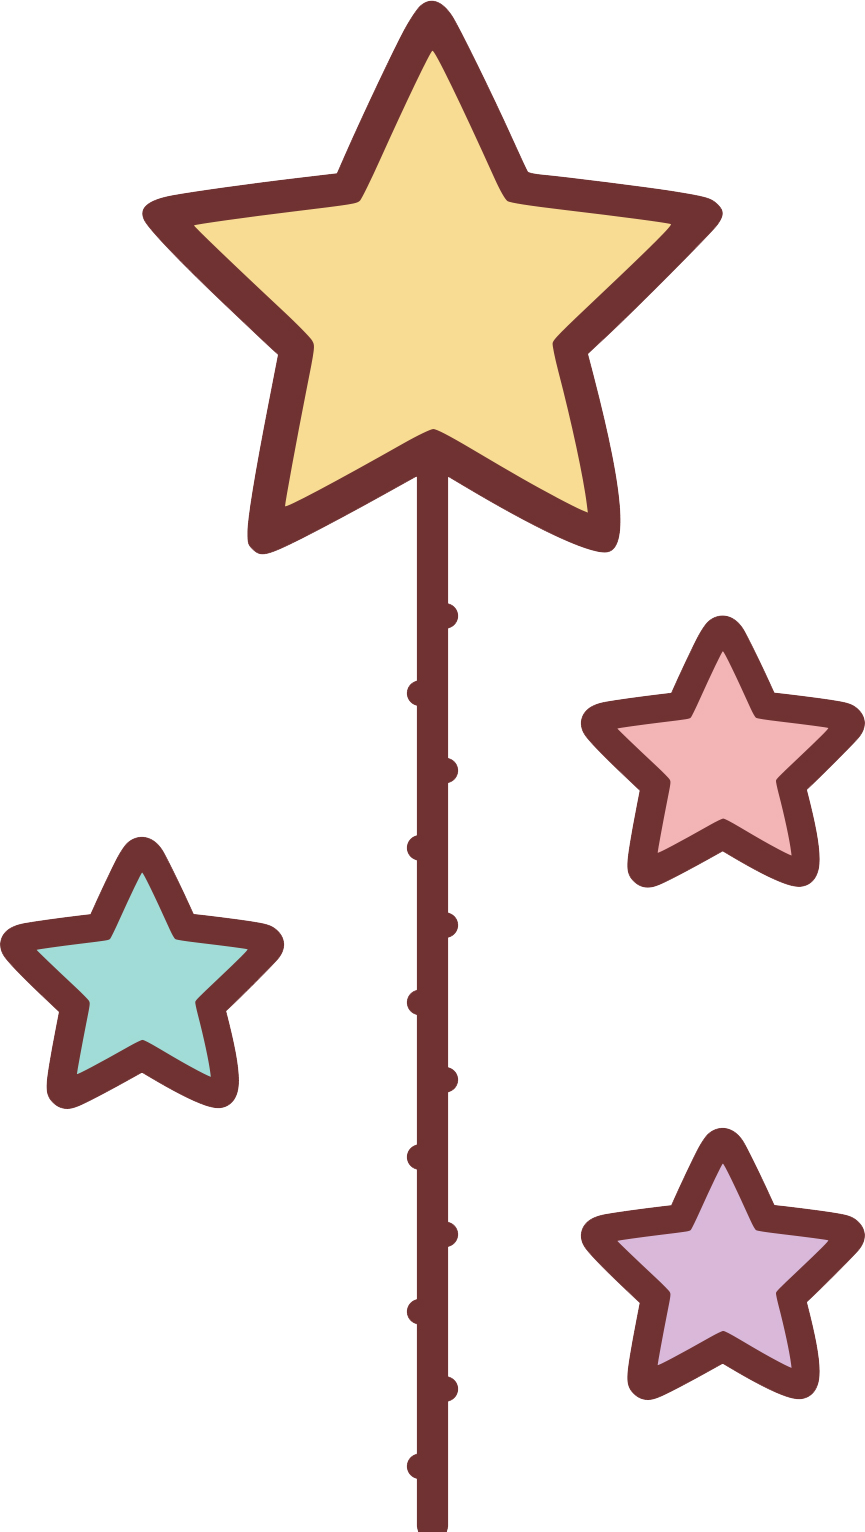 Colorful Star Wand Illustration PNG